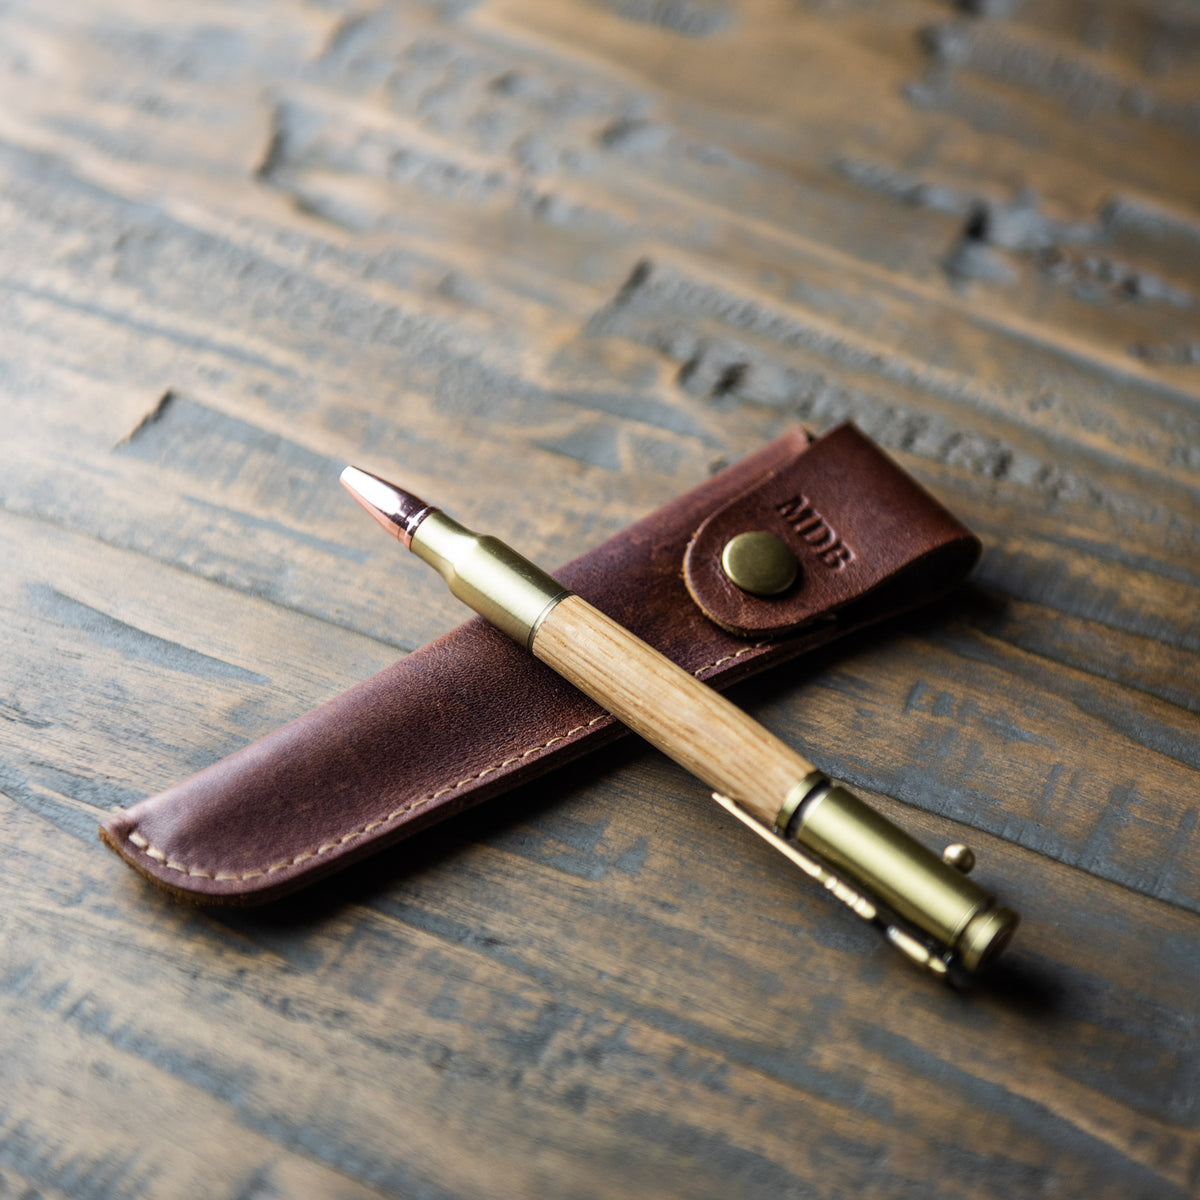 .30 caliber bolt action pen made of Tennessee Whiskey Barrel wood with a personalized leather pen sleeve 